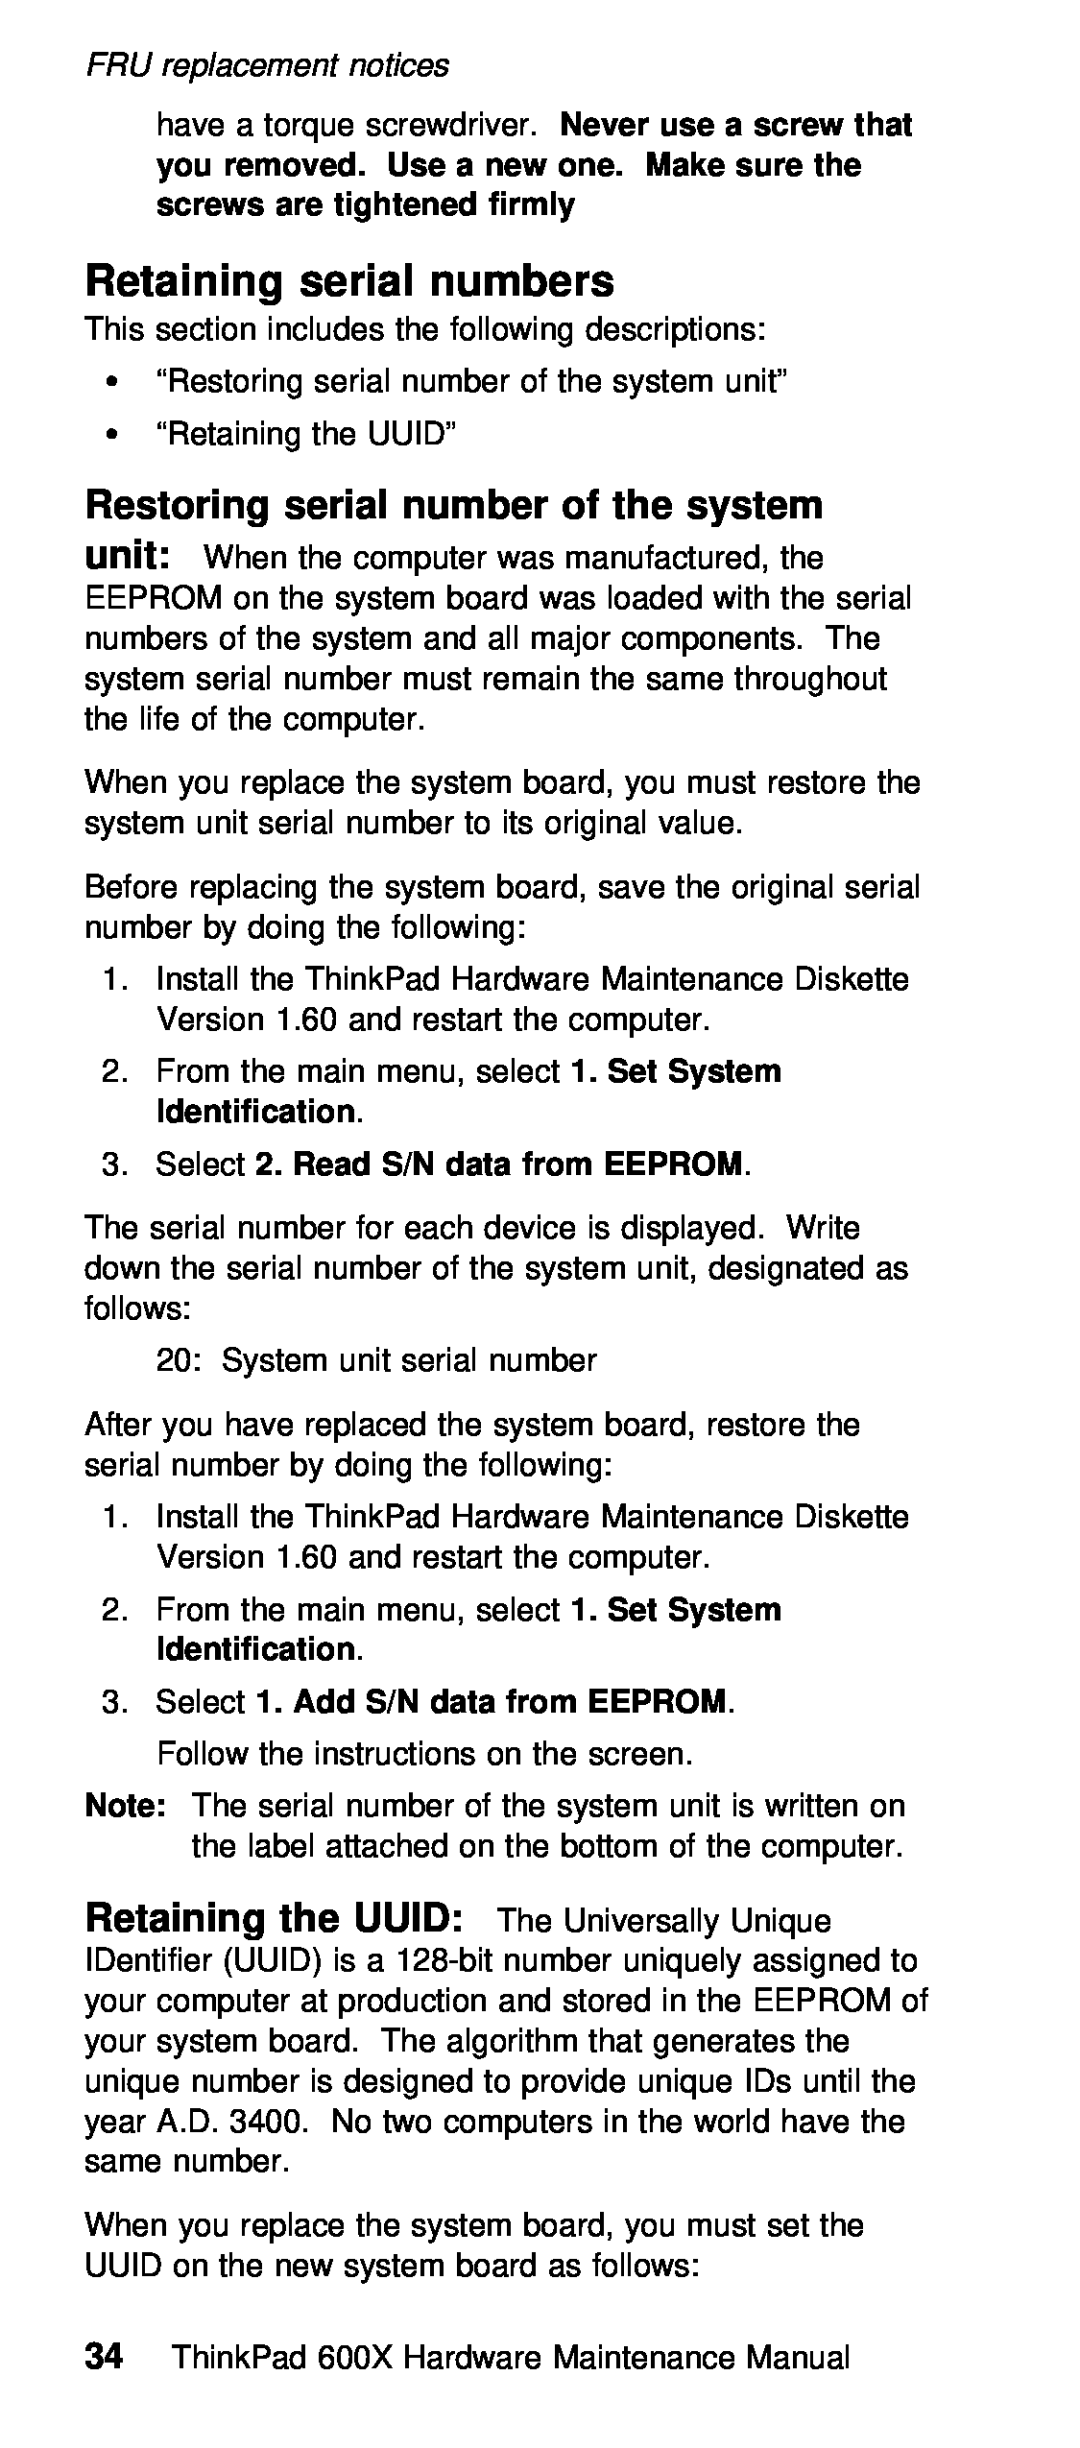 IBM 600X (MT 2646) manual Retaining serial numbers, Restoring serial number of the system, Uuid 